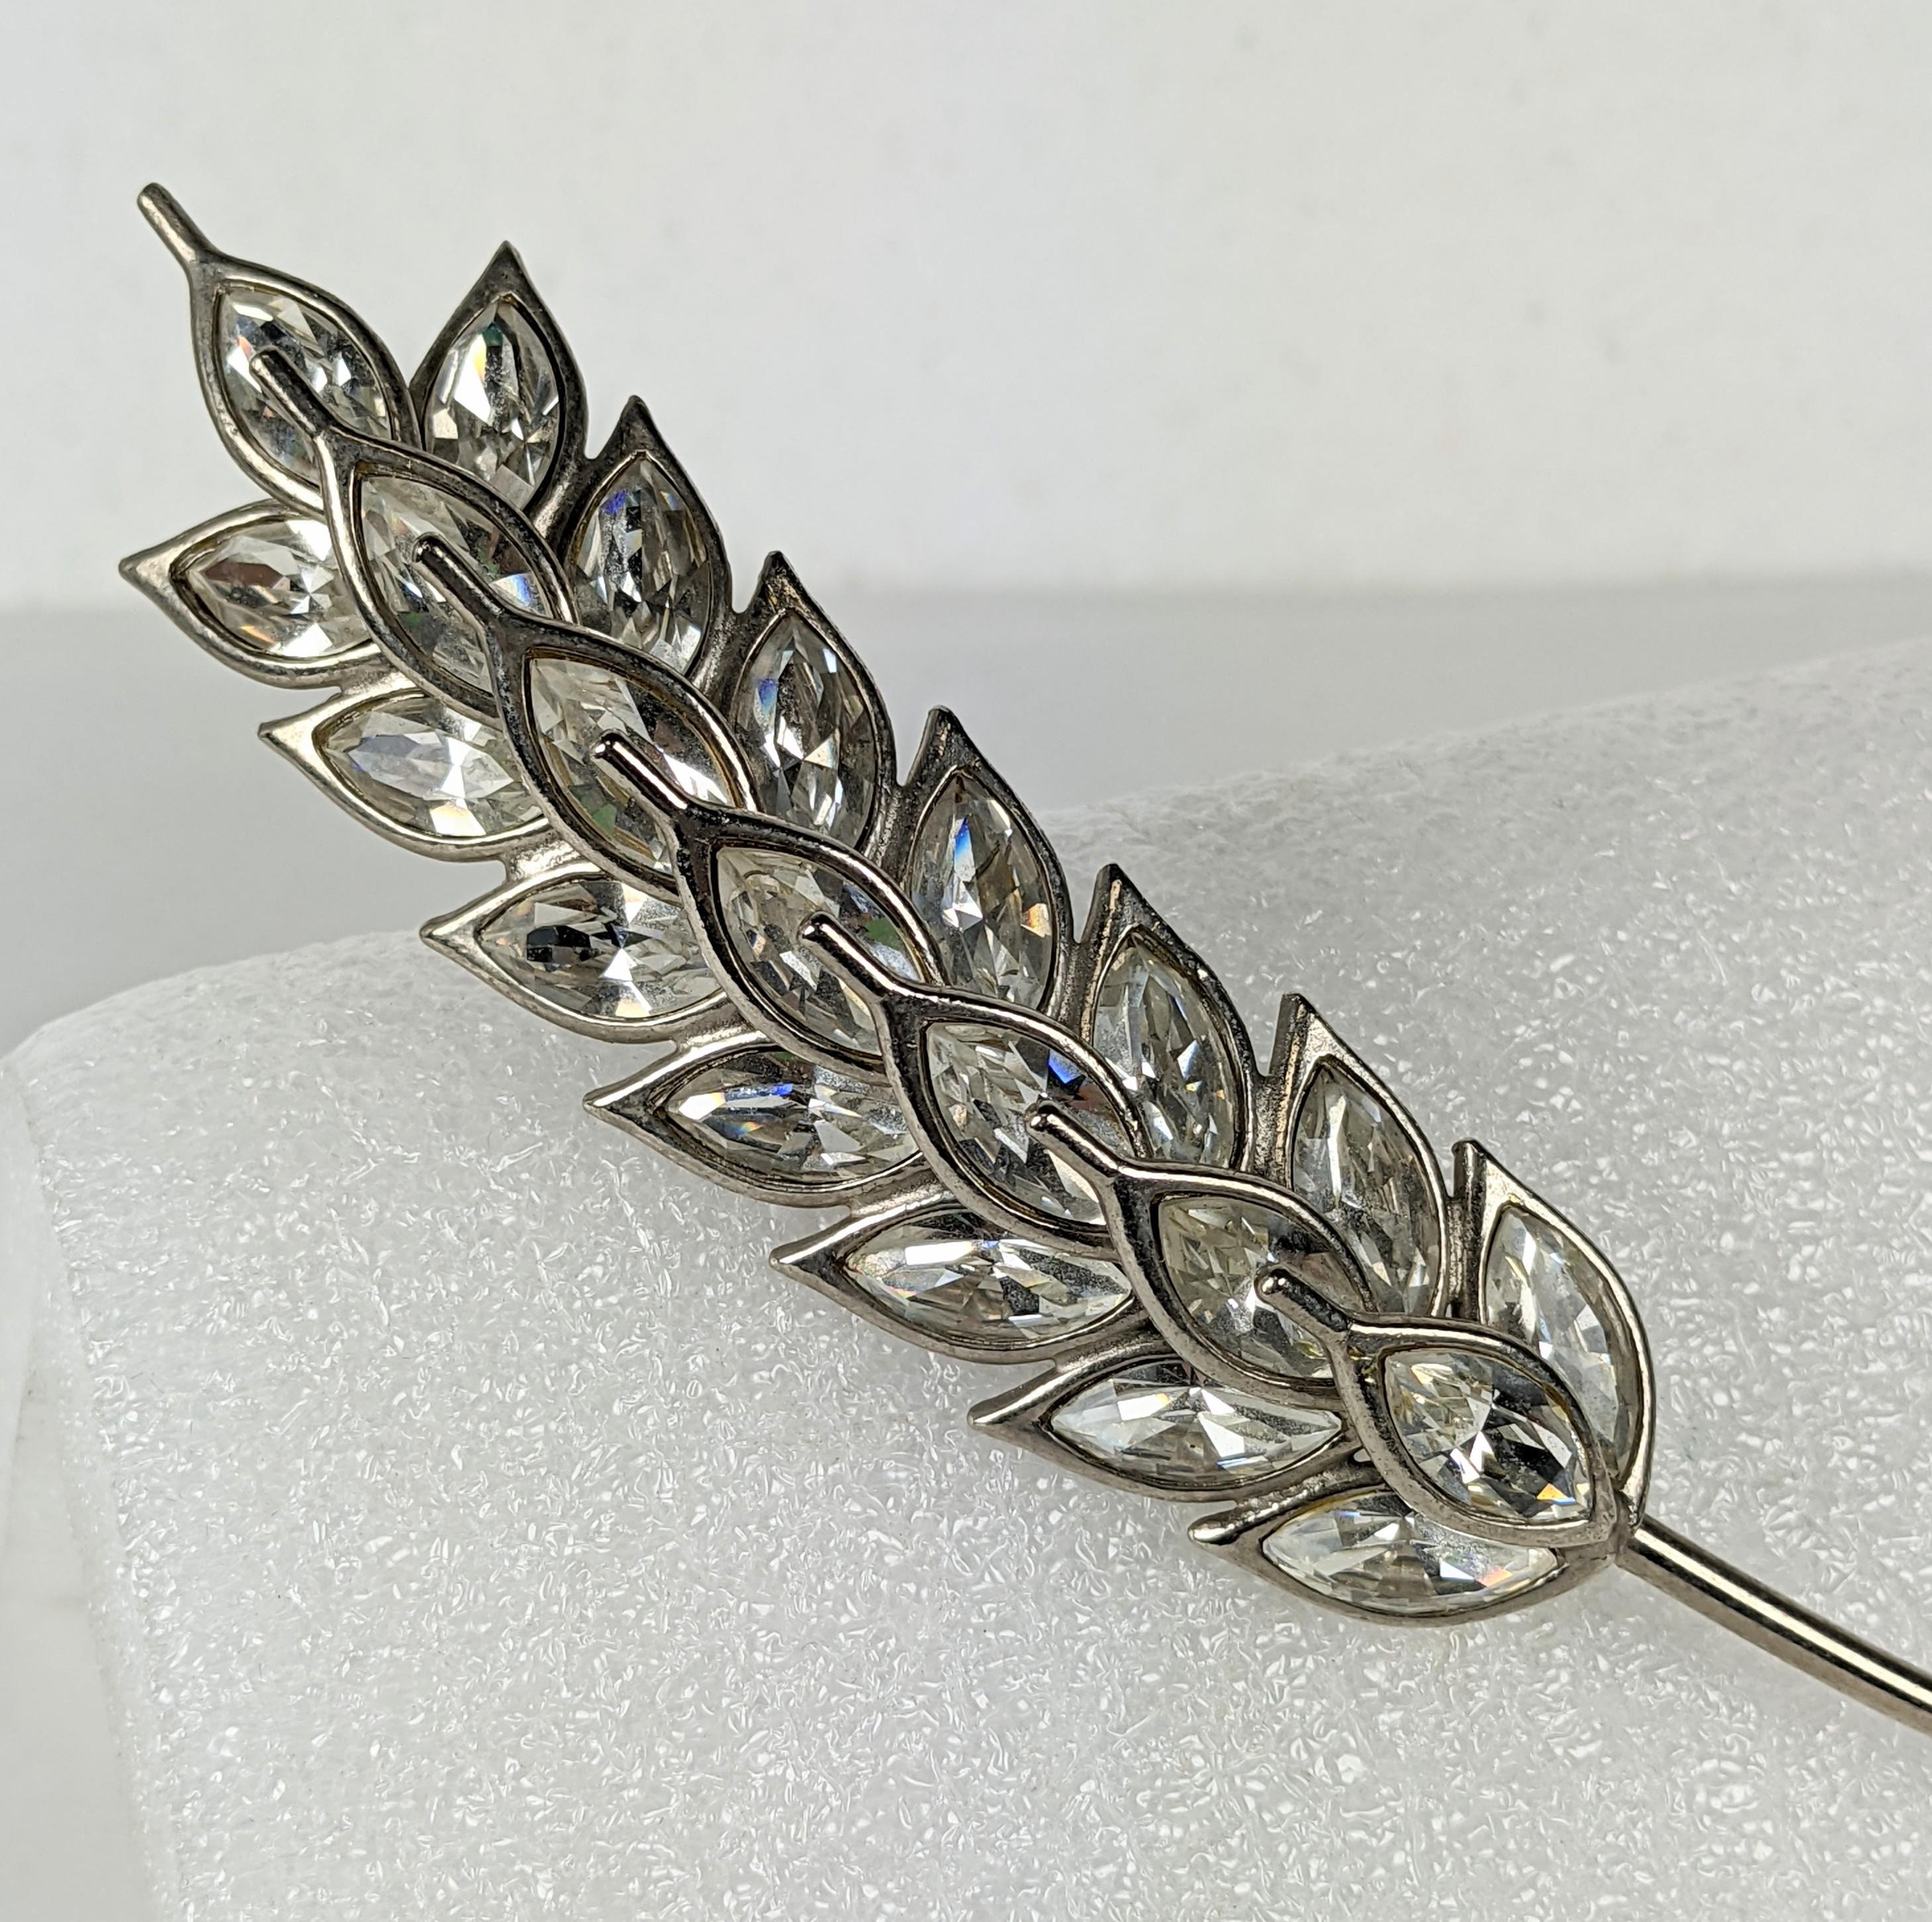 Yves Saint Laurent Crystal Wheat Brooch, by Maison Goossens, Paris. Beautiful construction, multi layered and large imposing scale set in silver plate metal. 1990's France.
6